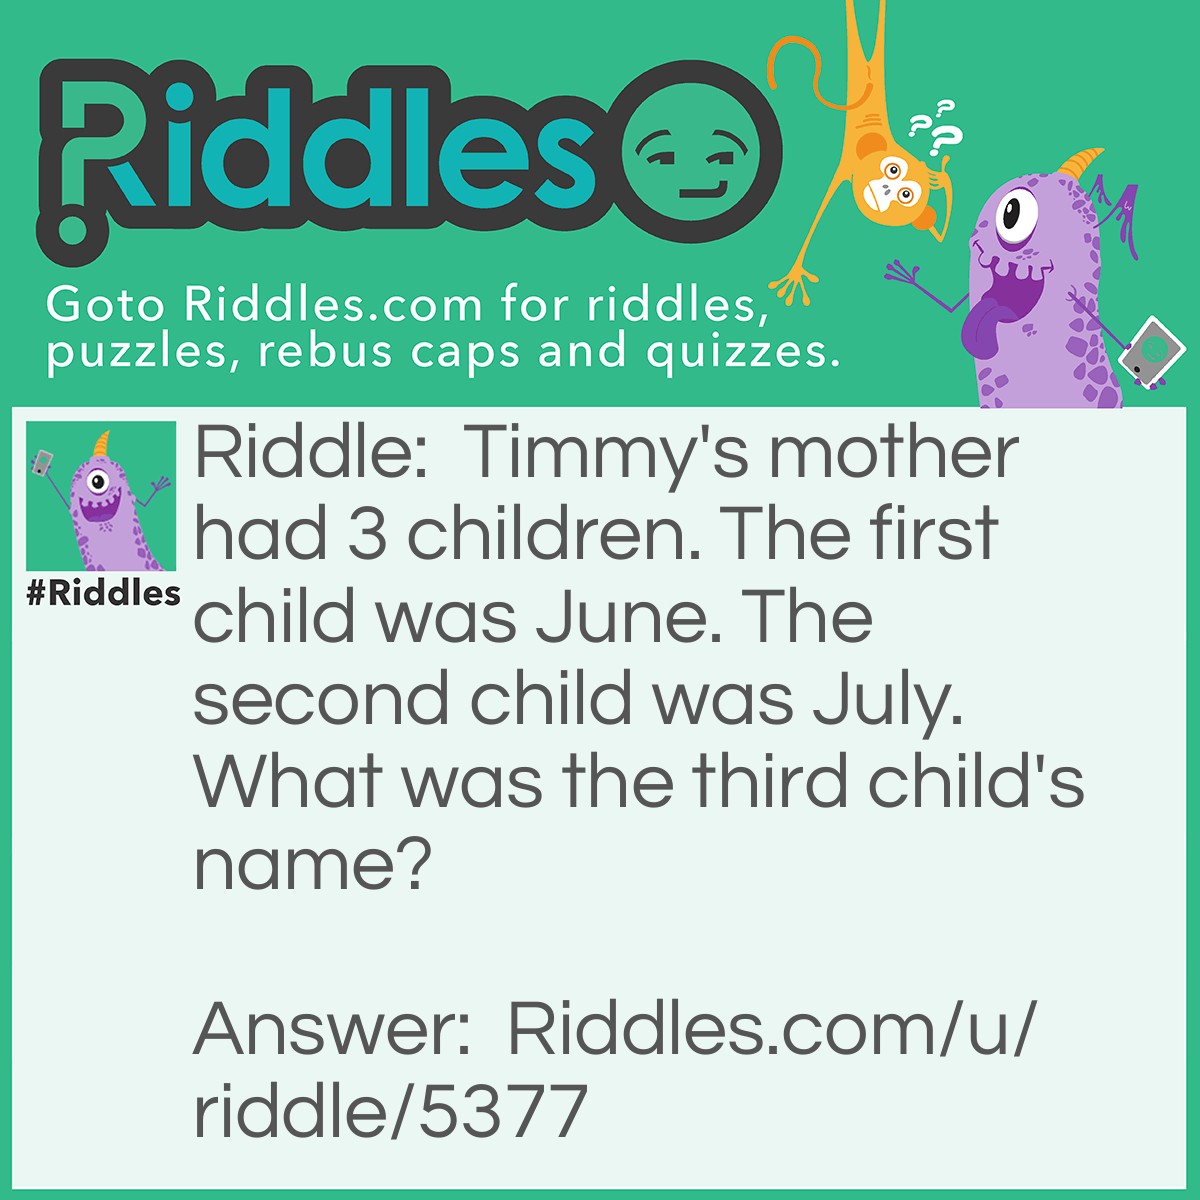 Riddle: Timmy's mother had 3 children. The first child was June. The second child was July. What was the third child's name? Answer: Timmy.